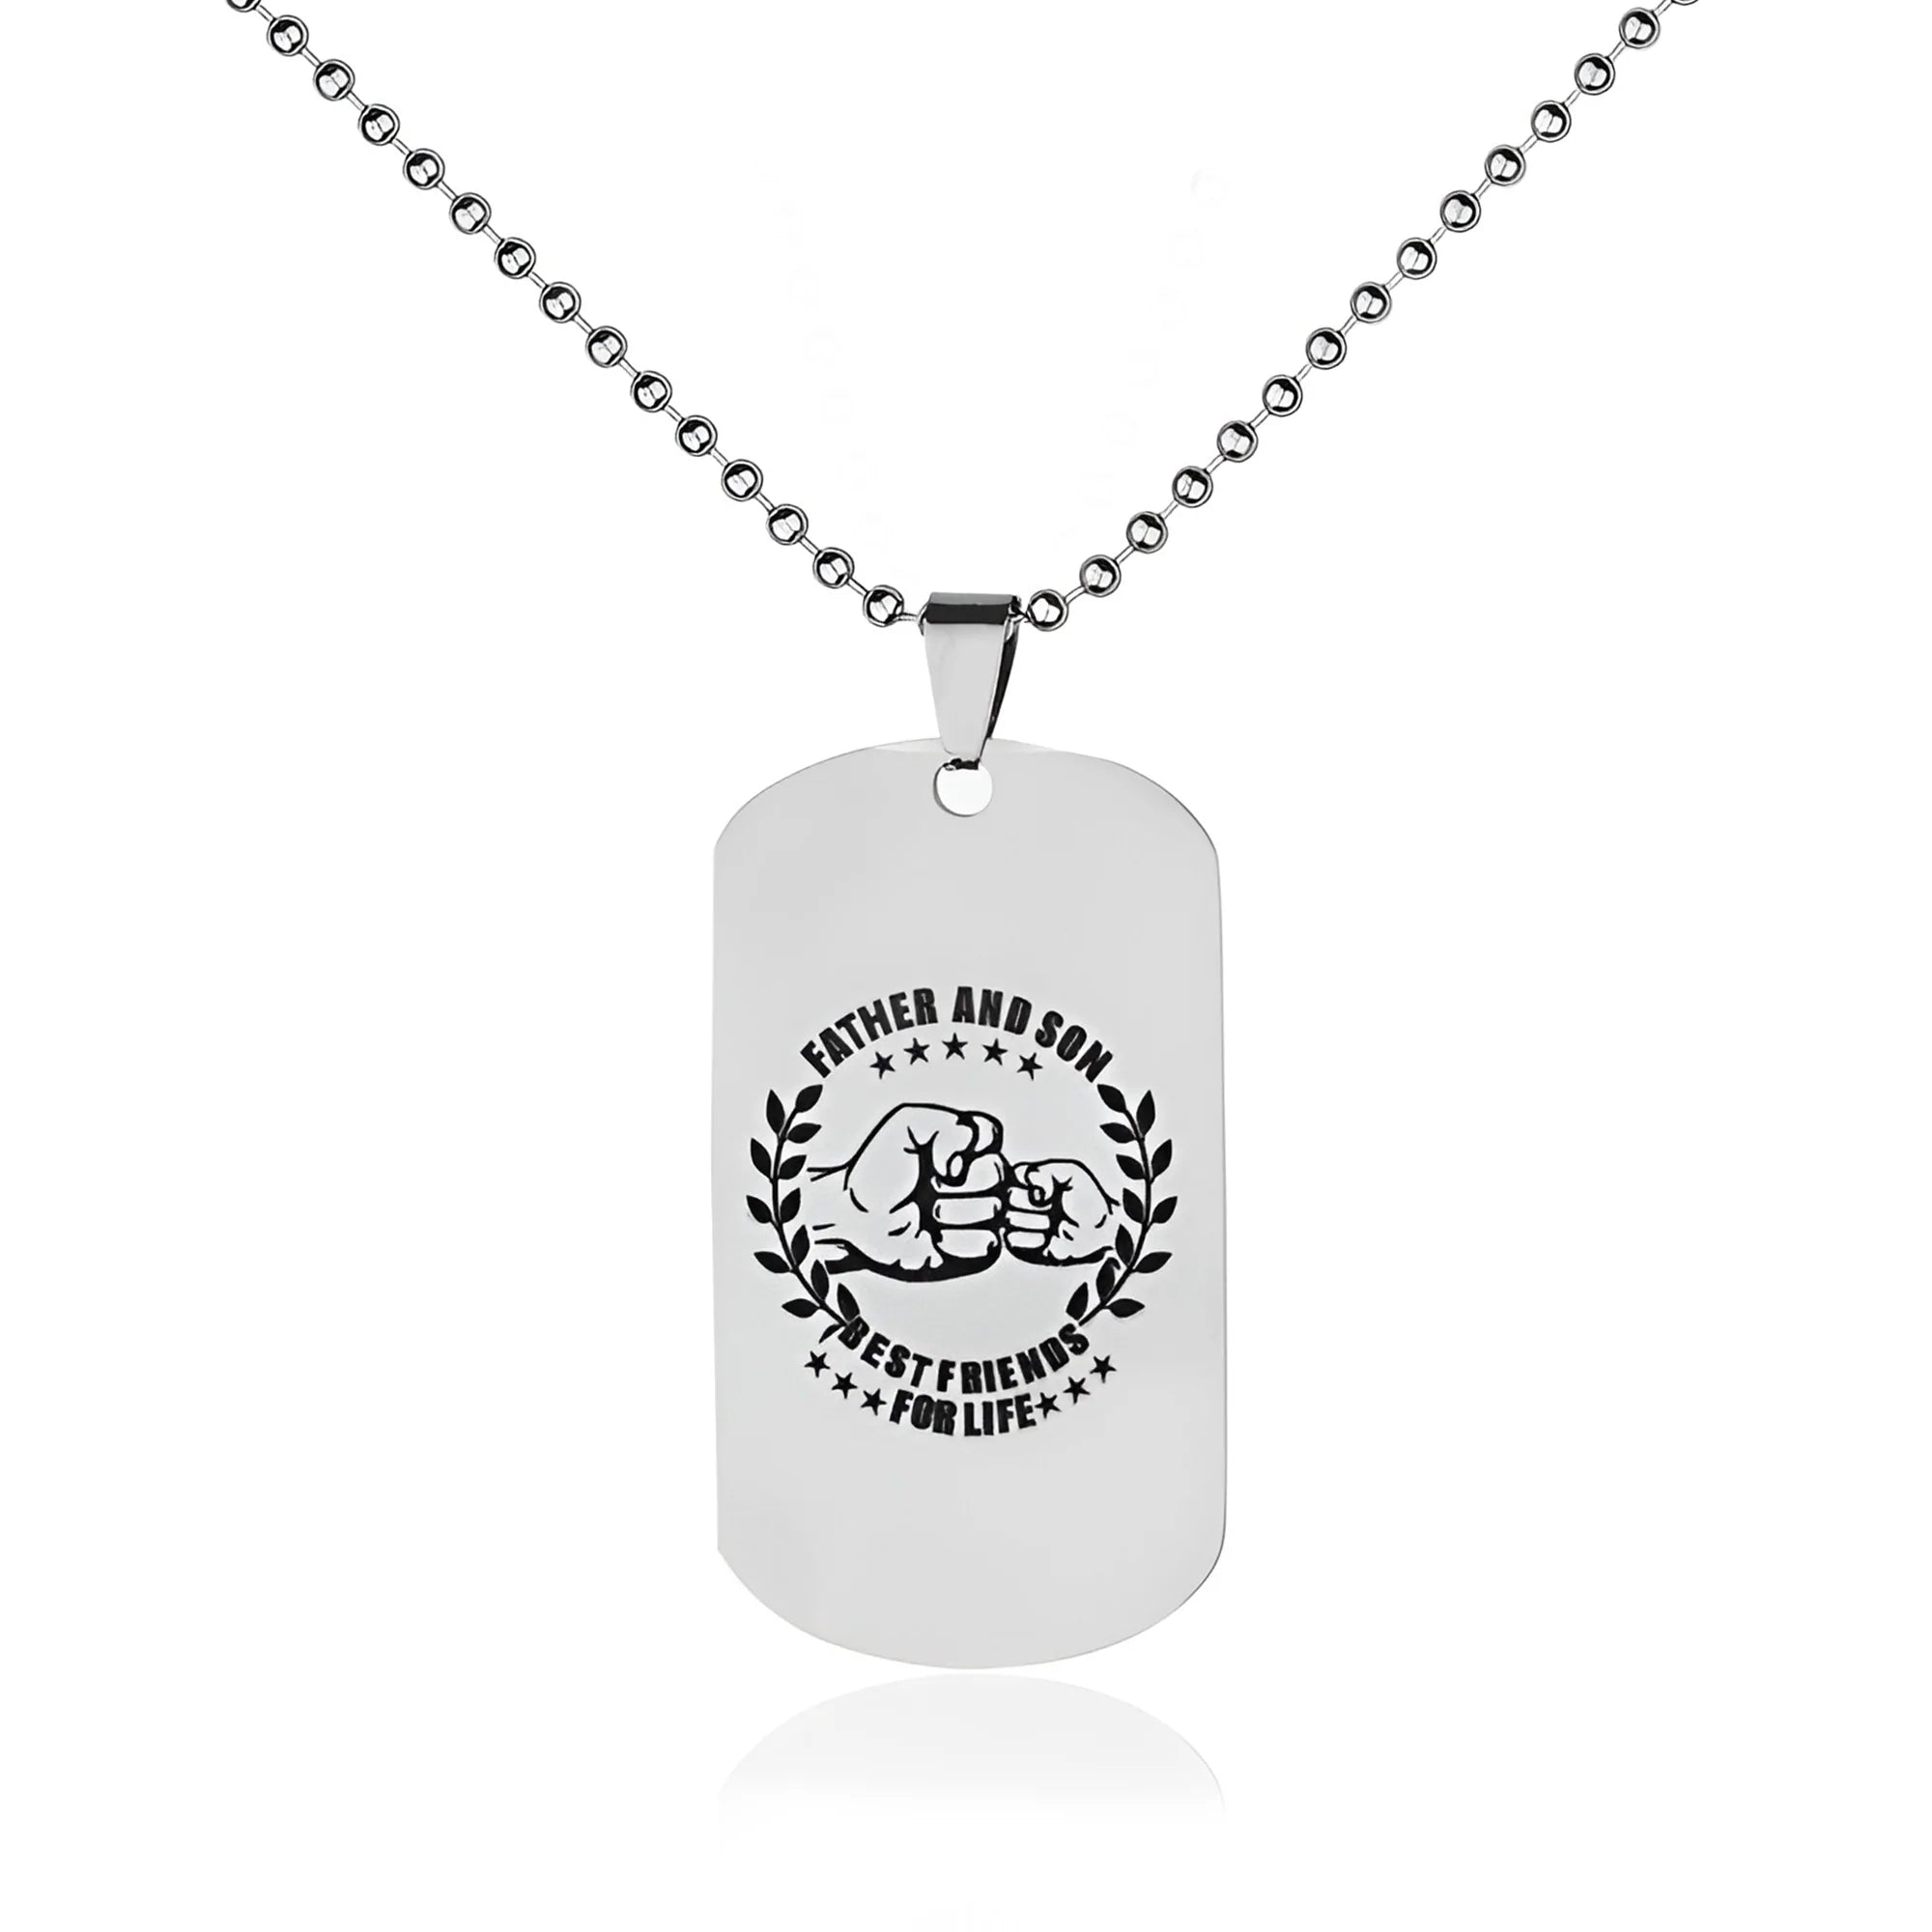 For Son - Father And Son Best Friends For Life Fist Pendant Necklace